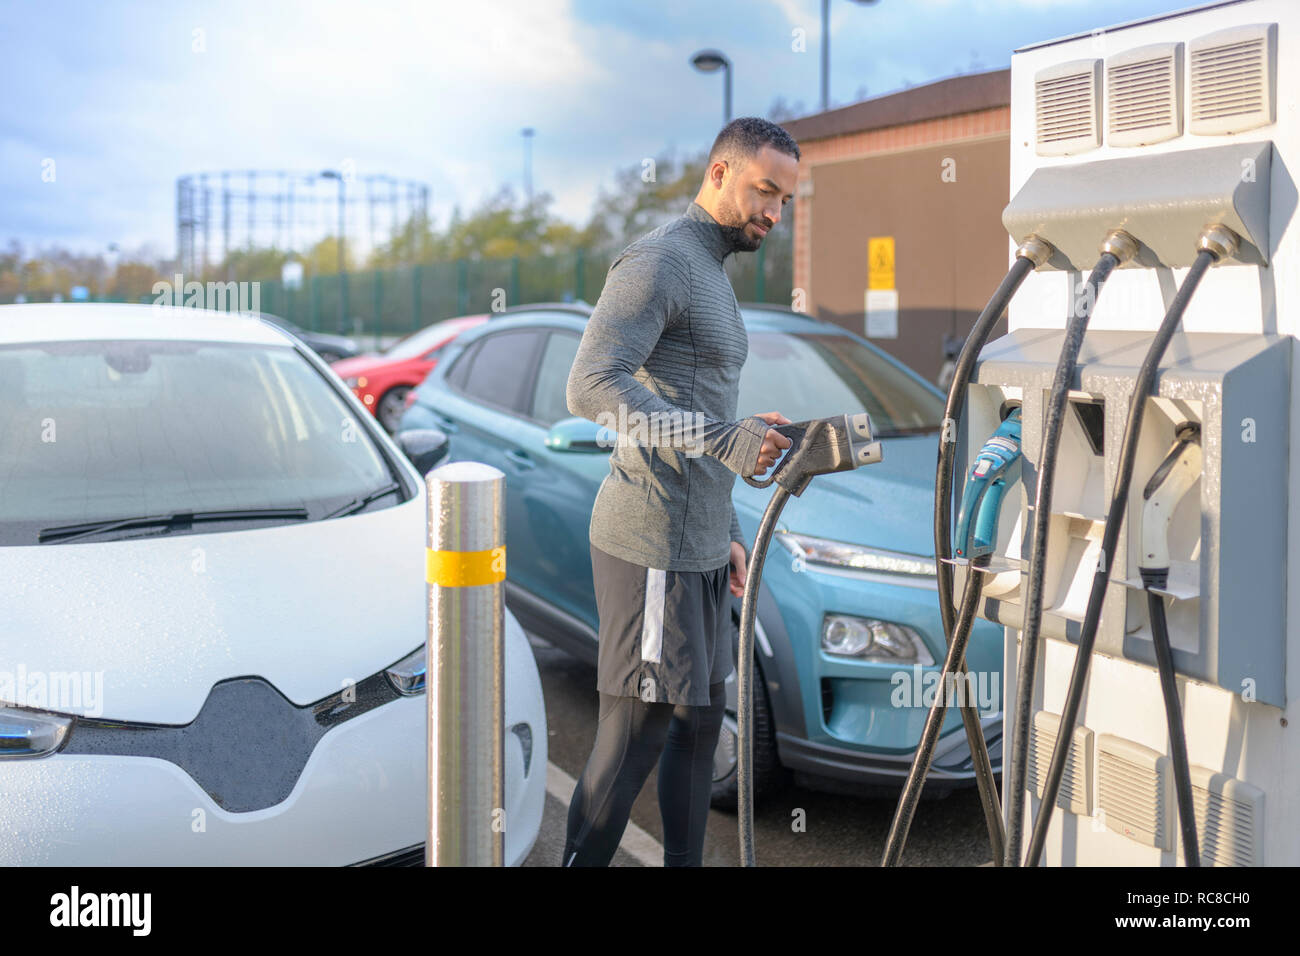 Sportsman at electric car charging point, Manchester, UK Stock Photo